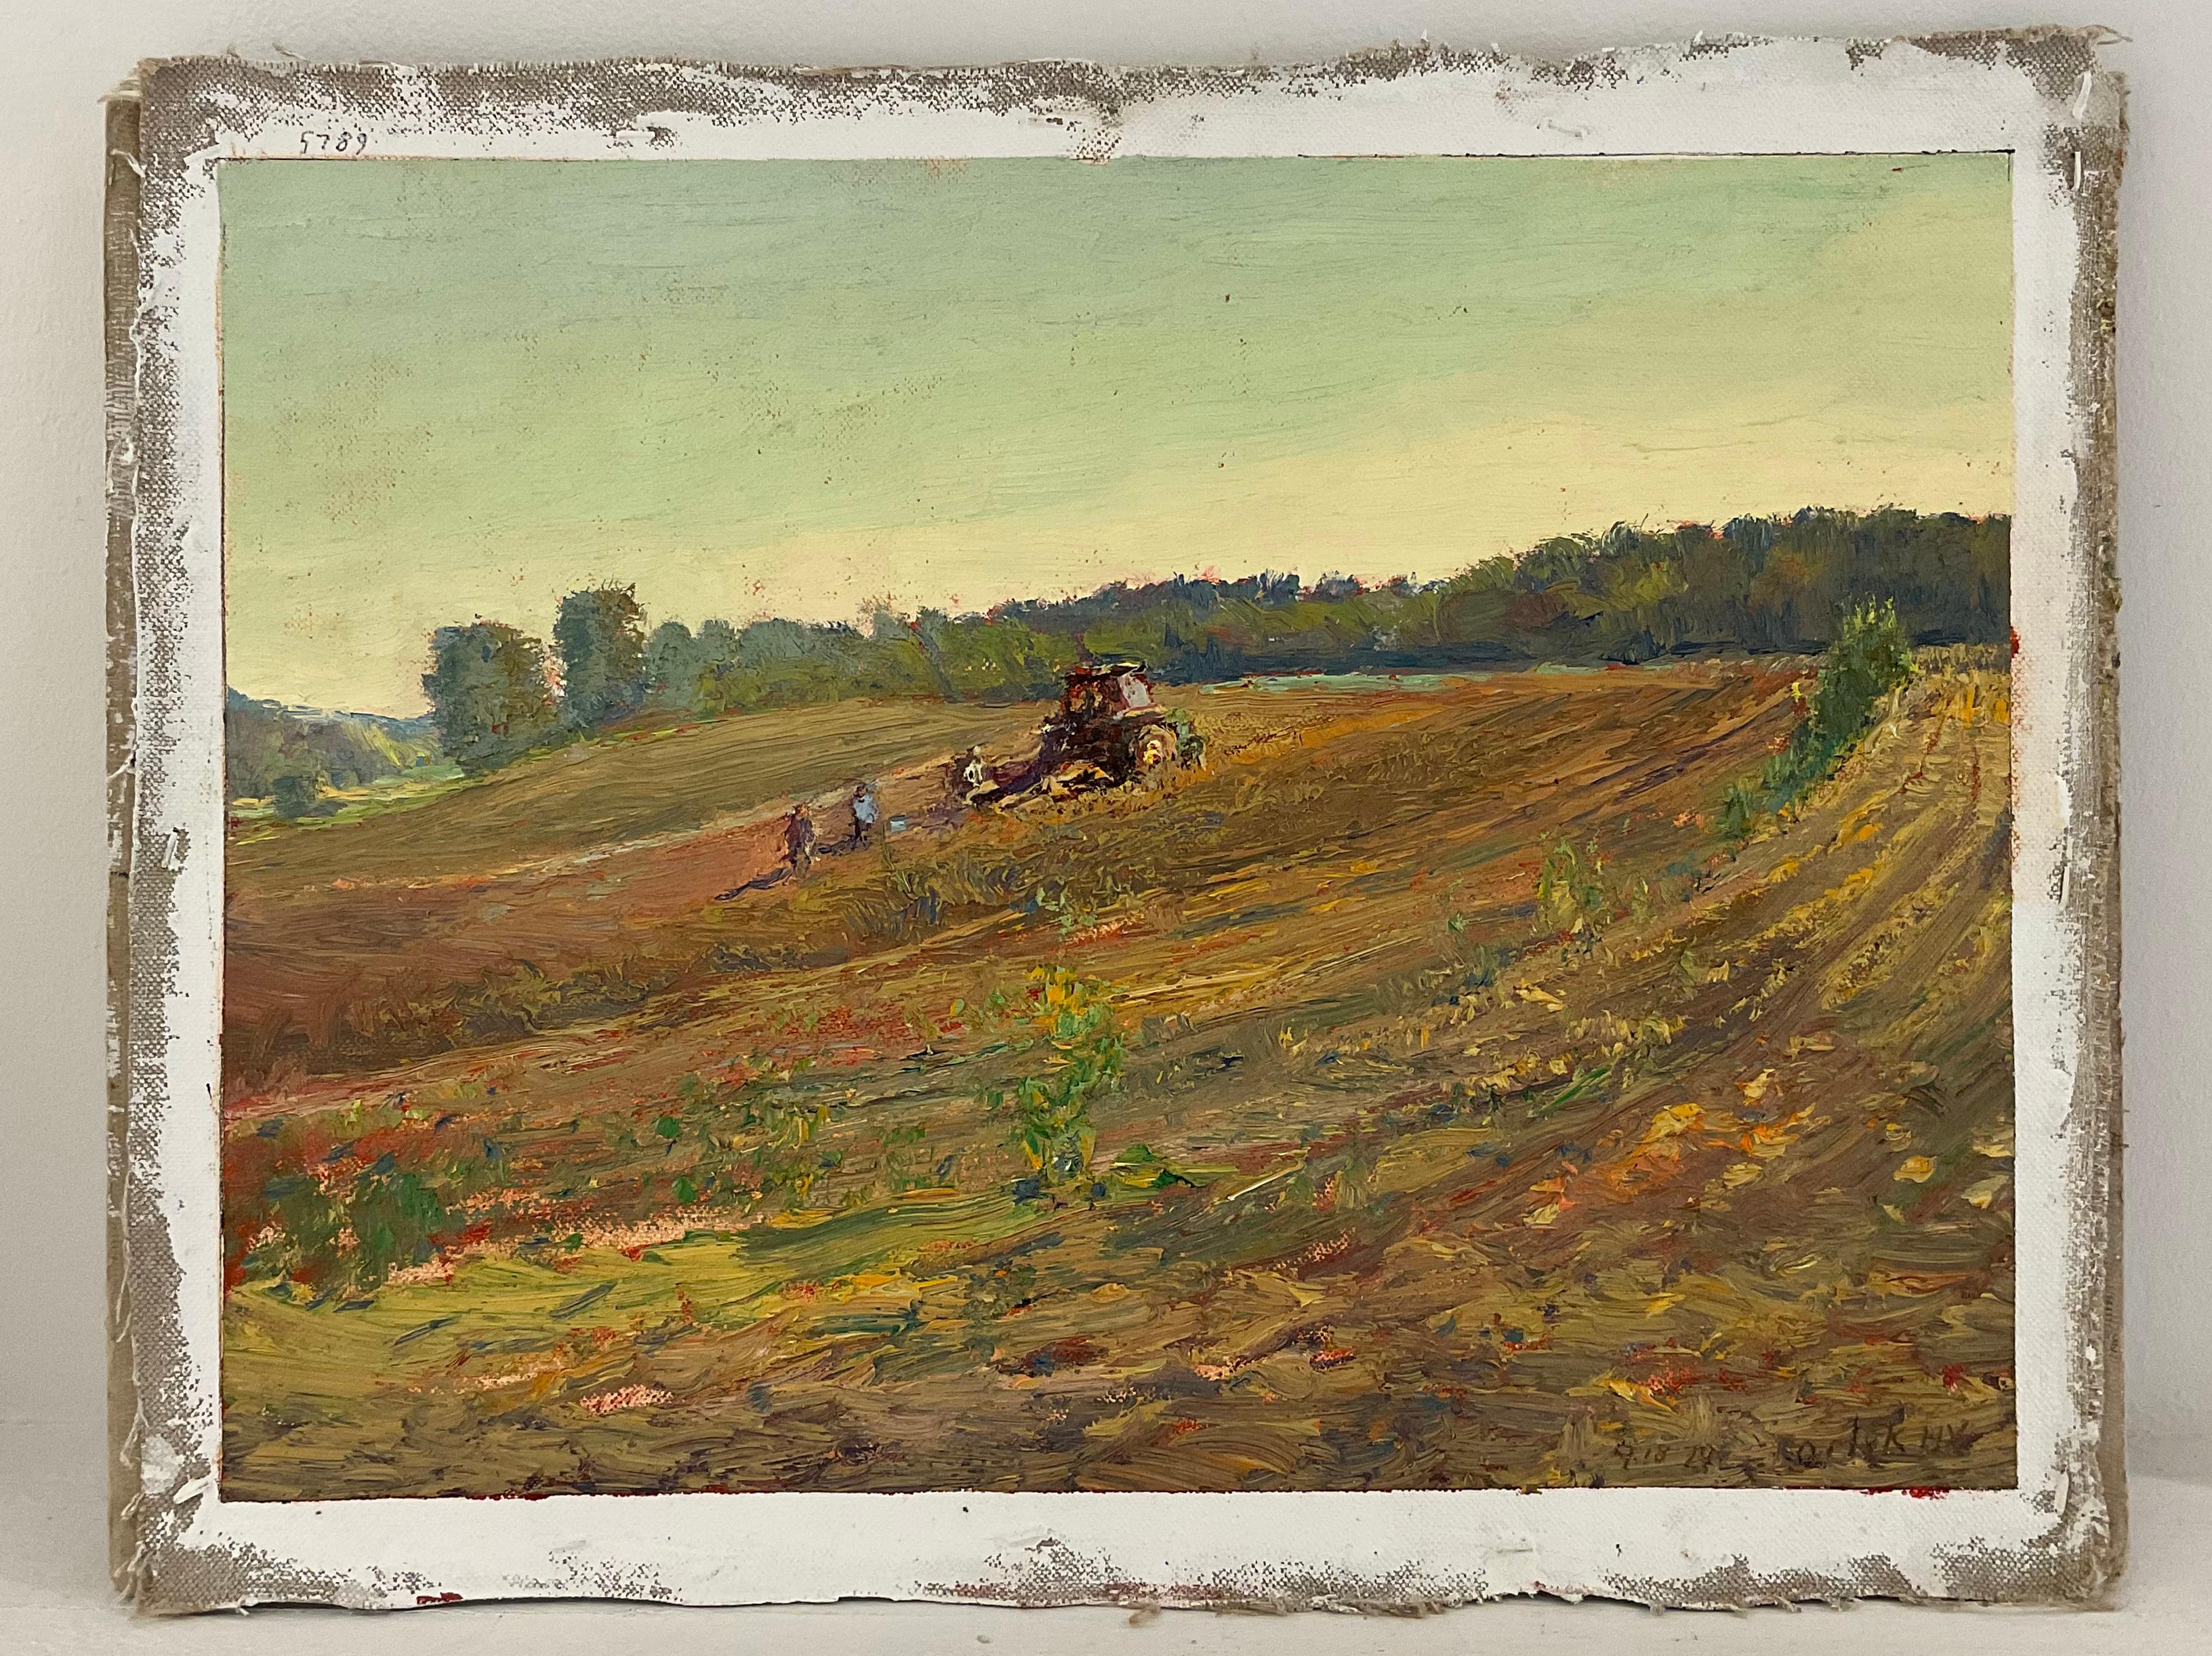 #5789 Gleaners: Impressionist En Plein Air Landscape of Tractor in a Farm Field  - Painting by Harry Orlyk